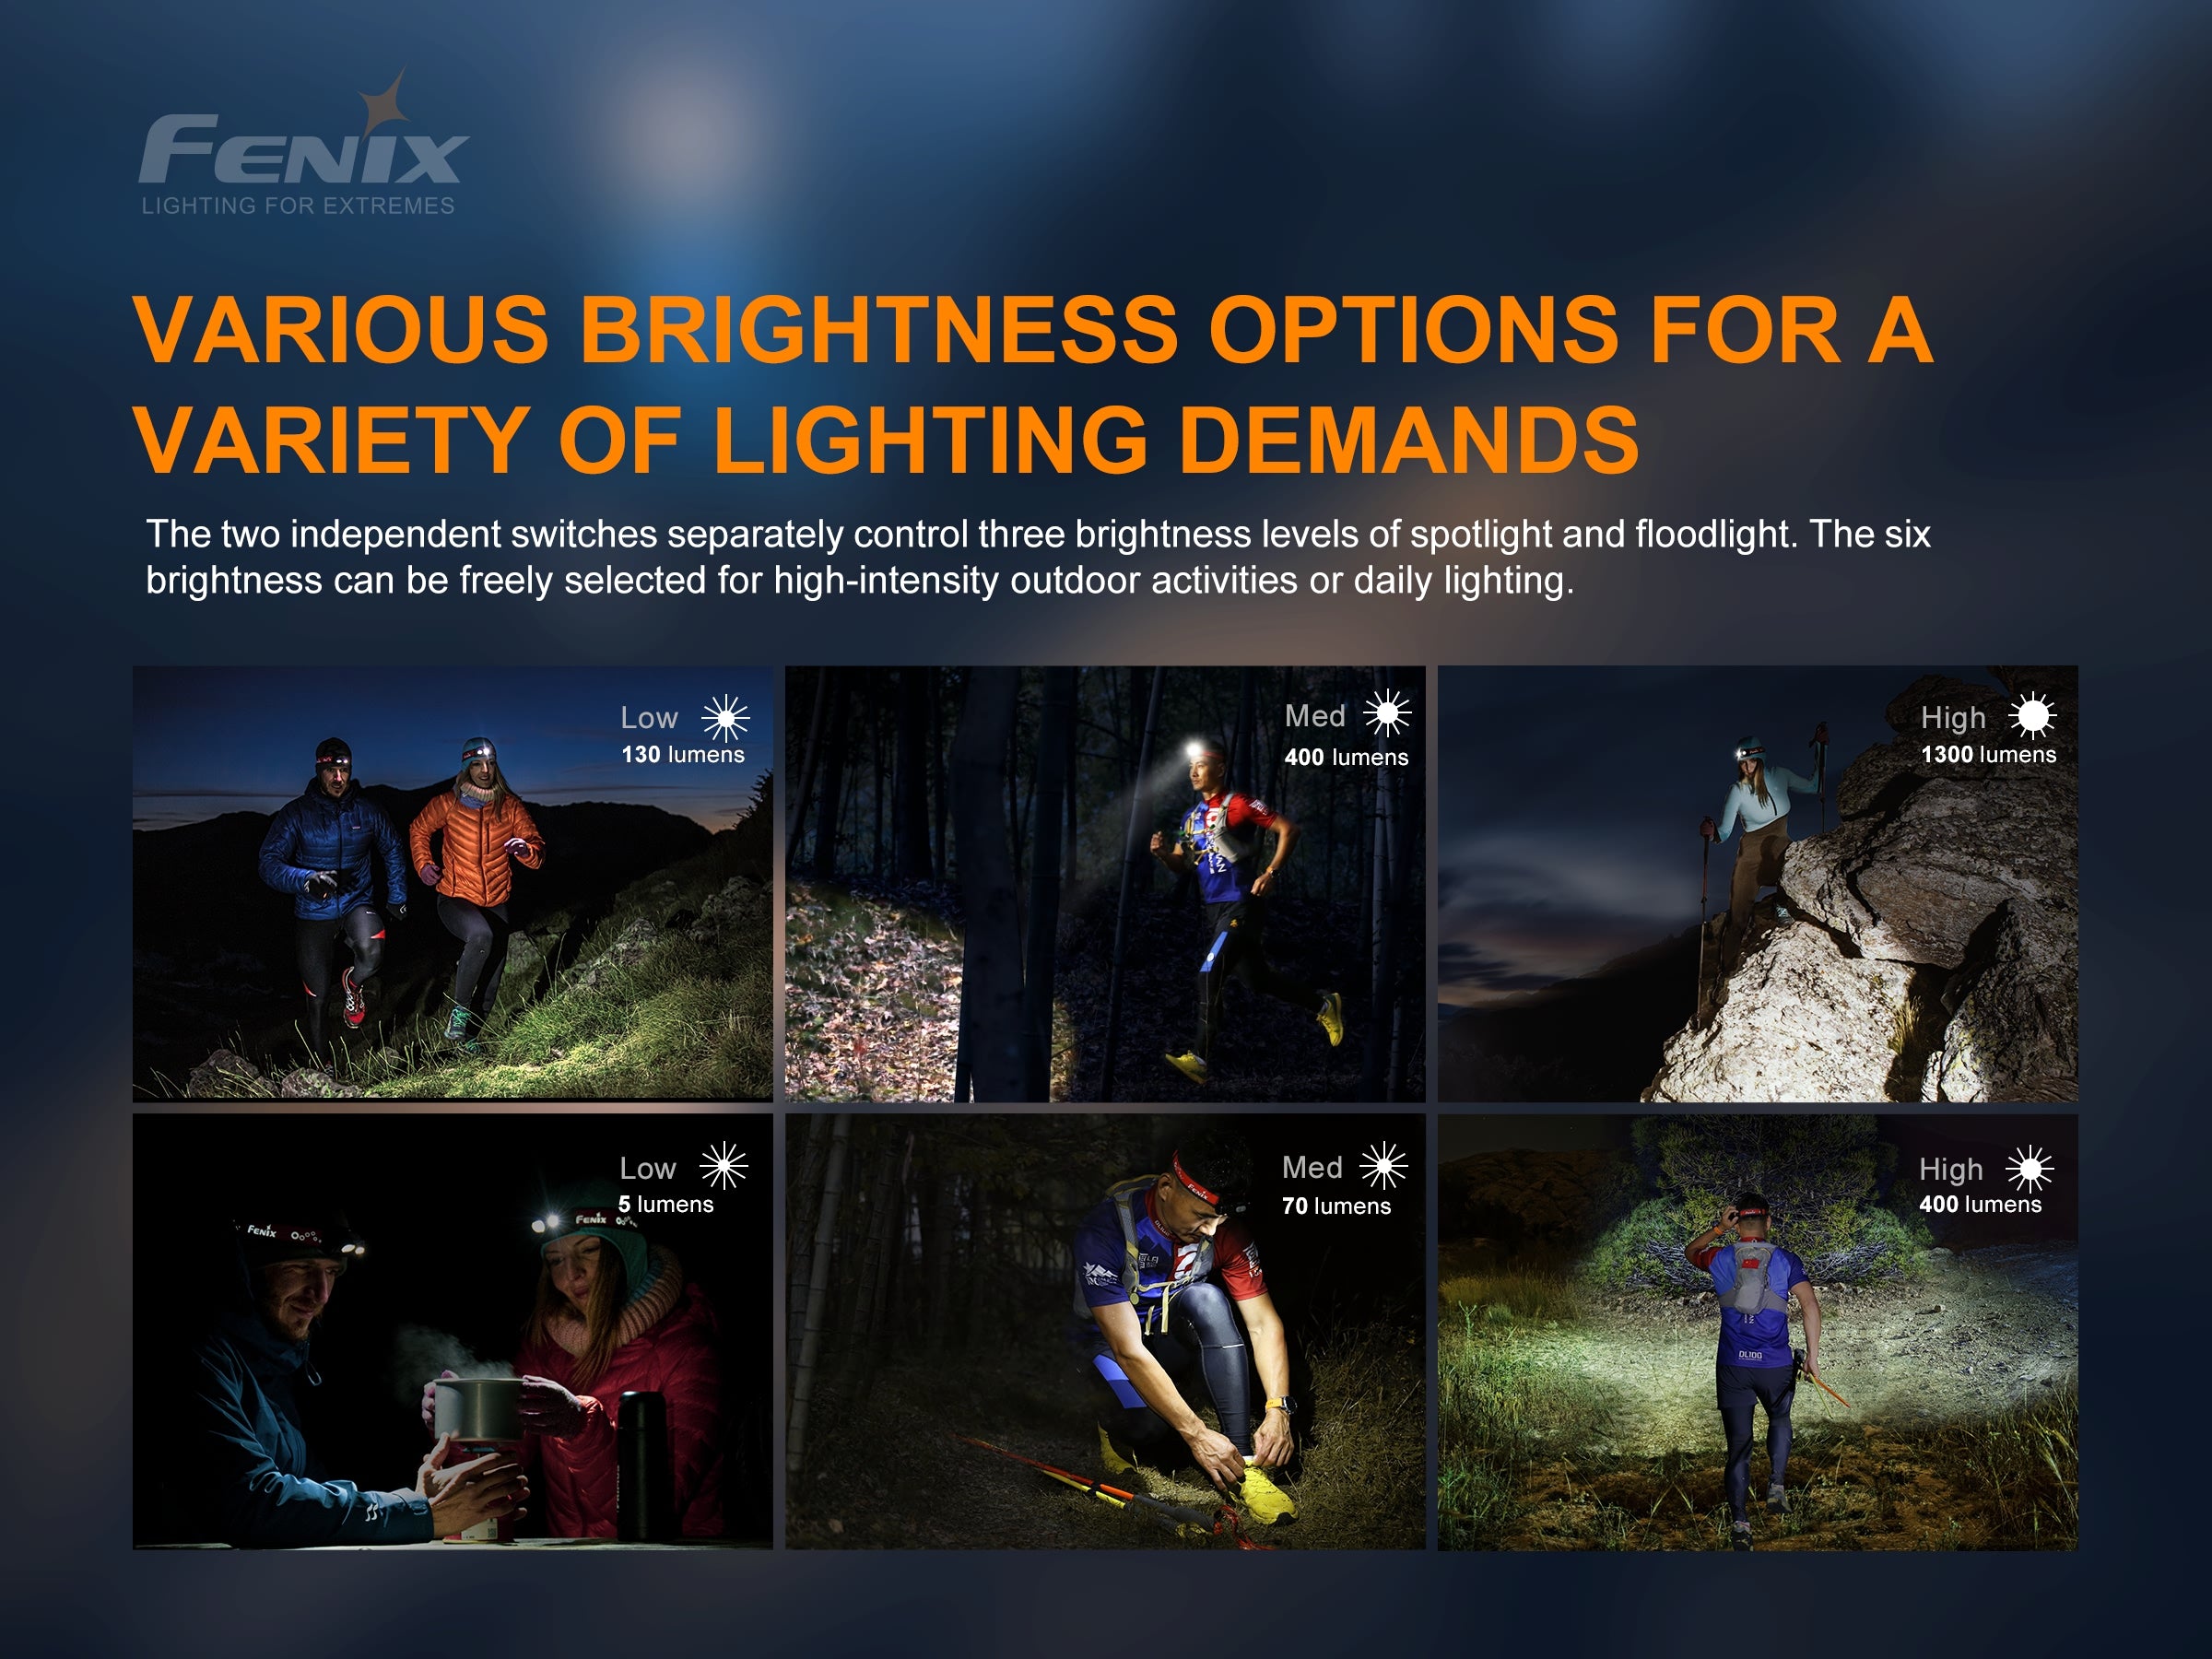 FENIX HM65R-T Rechargeable Headlamp with SPORT Headband Fit System